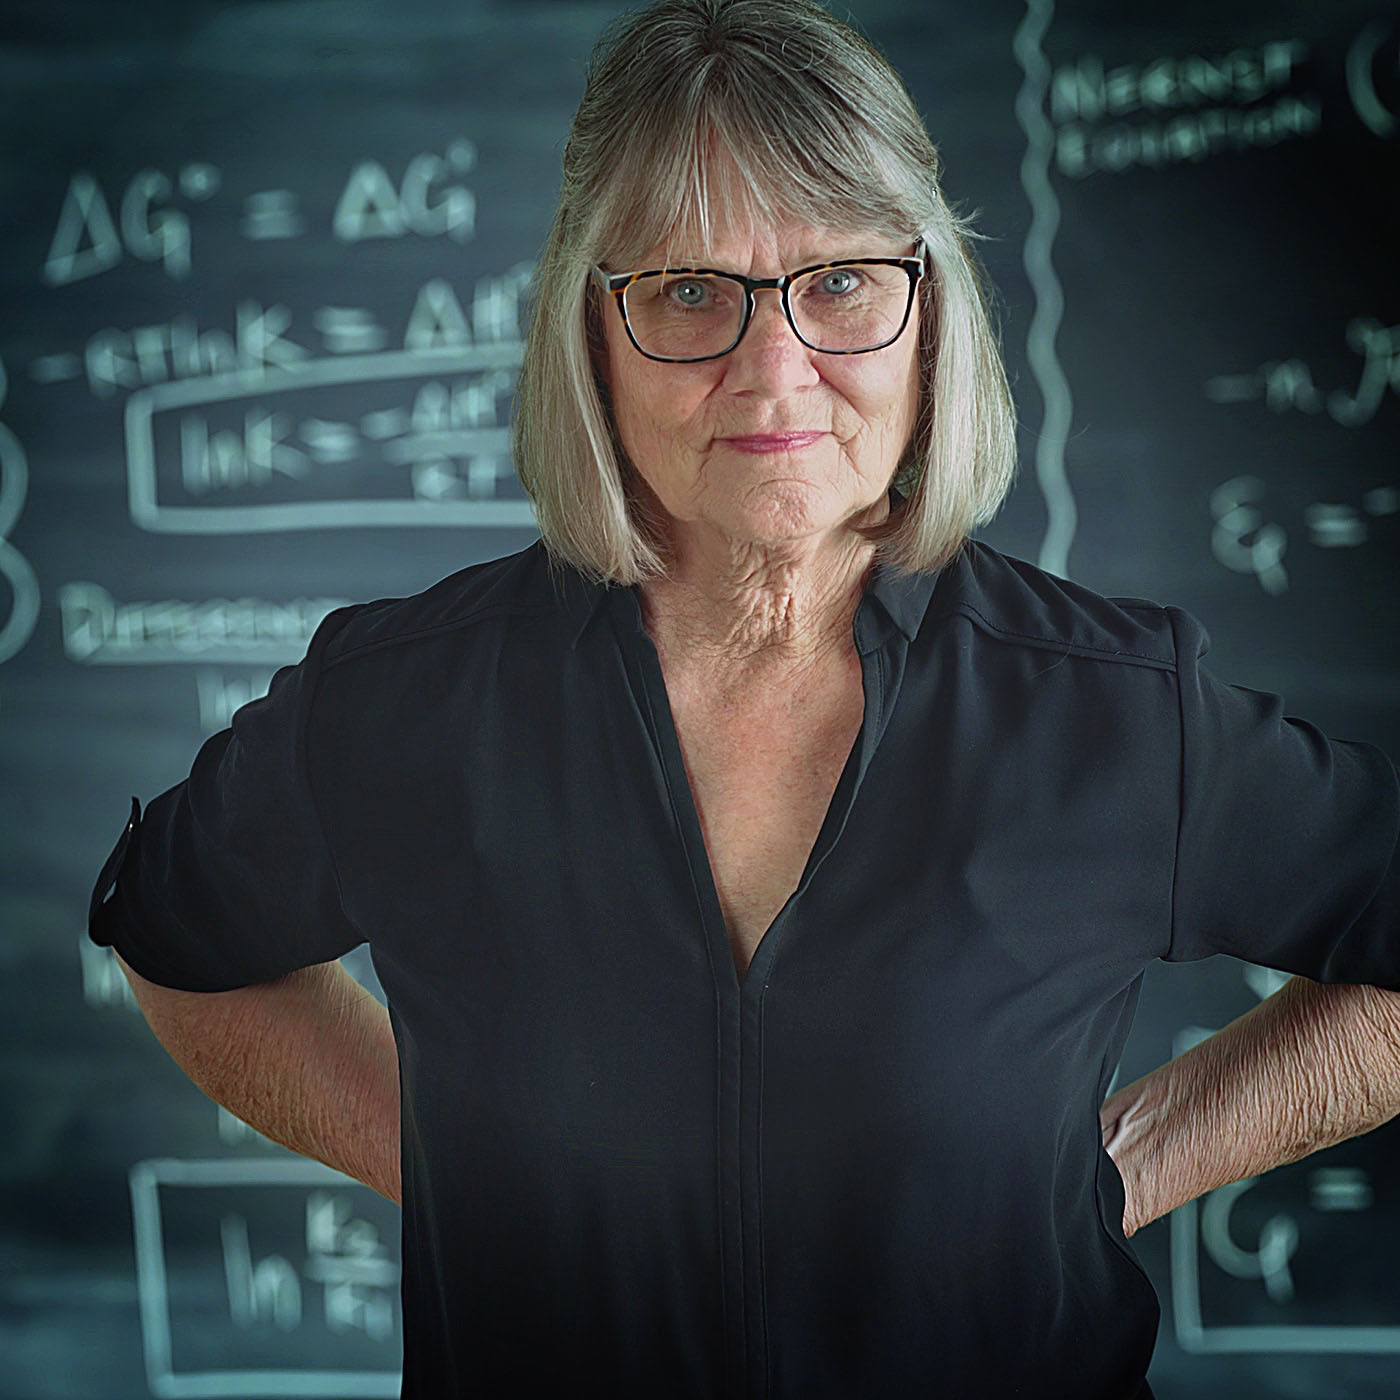 Old senior woman teacher with serious attitude posing in front of chalkboard